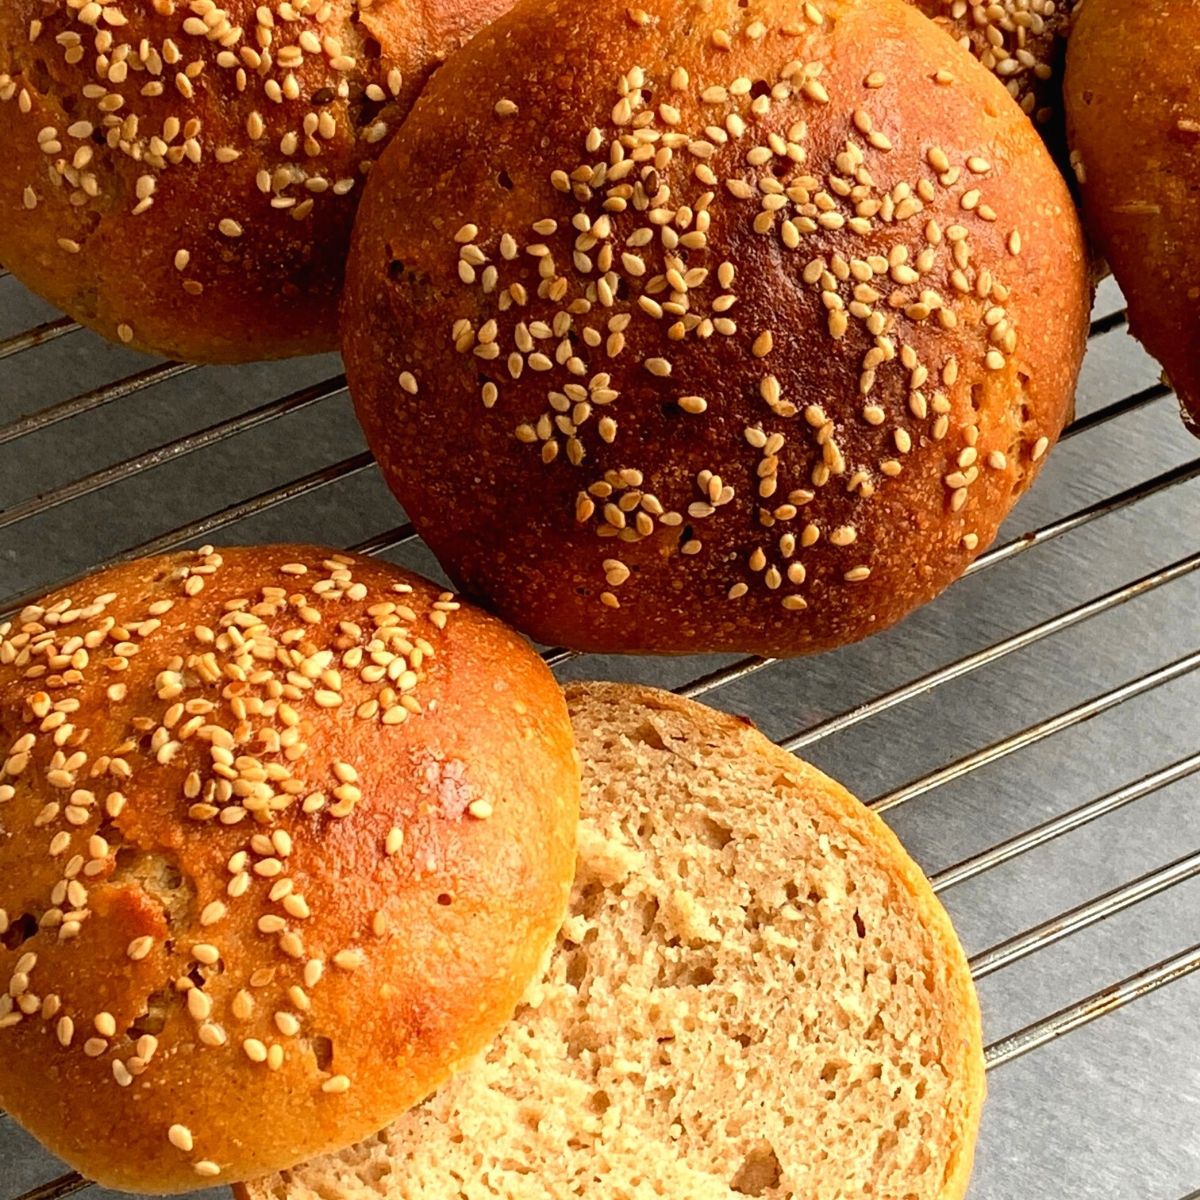 Vegan Sourdough Burger Buns are soft and chewy, eggless burger or sandwich buns. This is an easy recipe for a sourdough bread beginner.